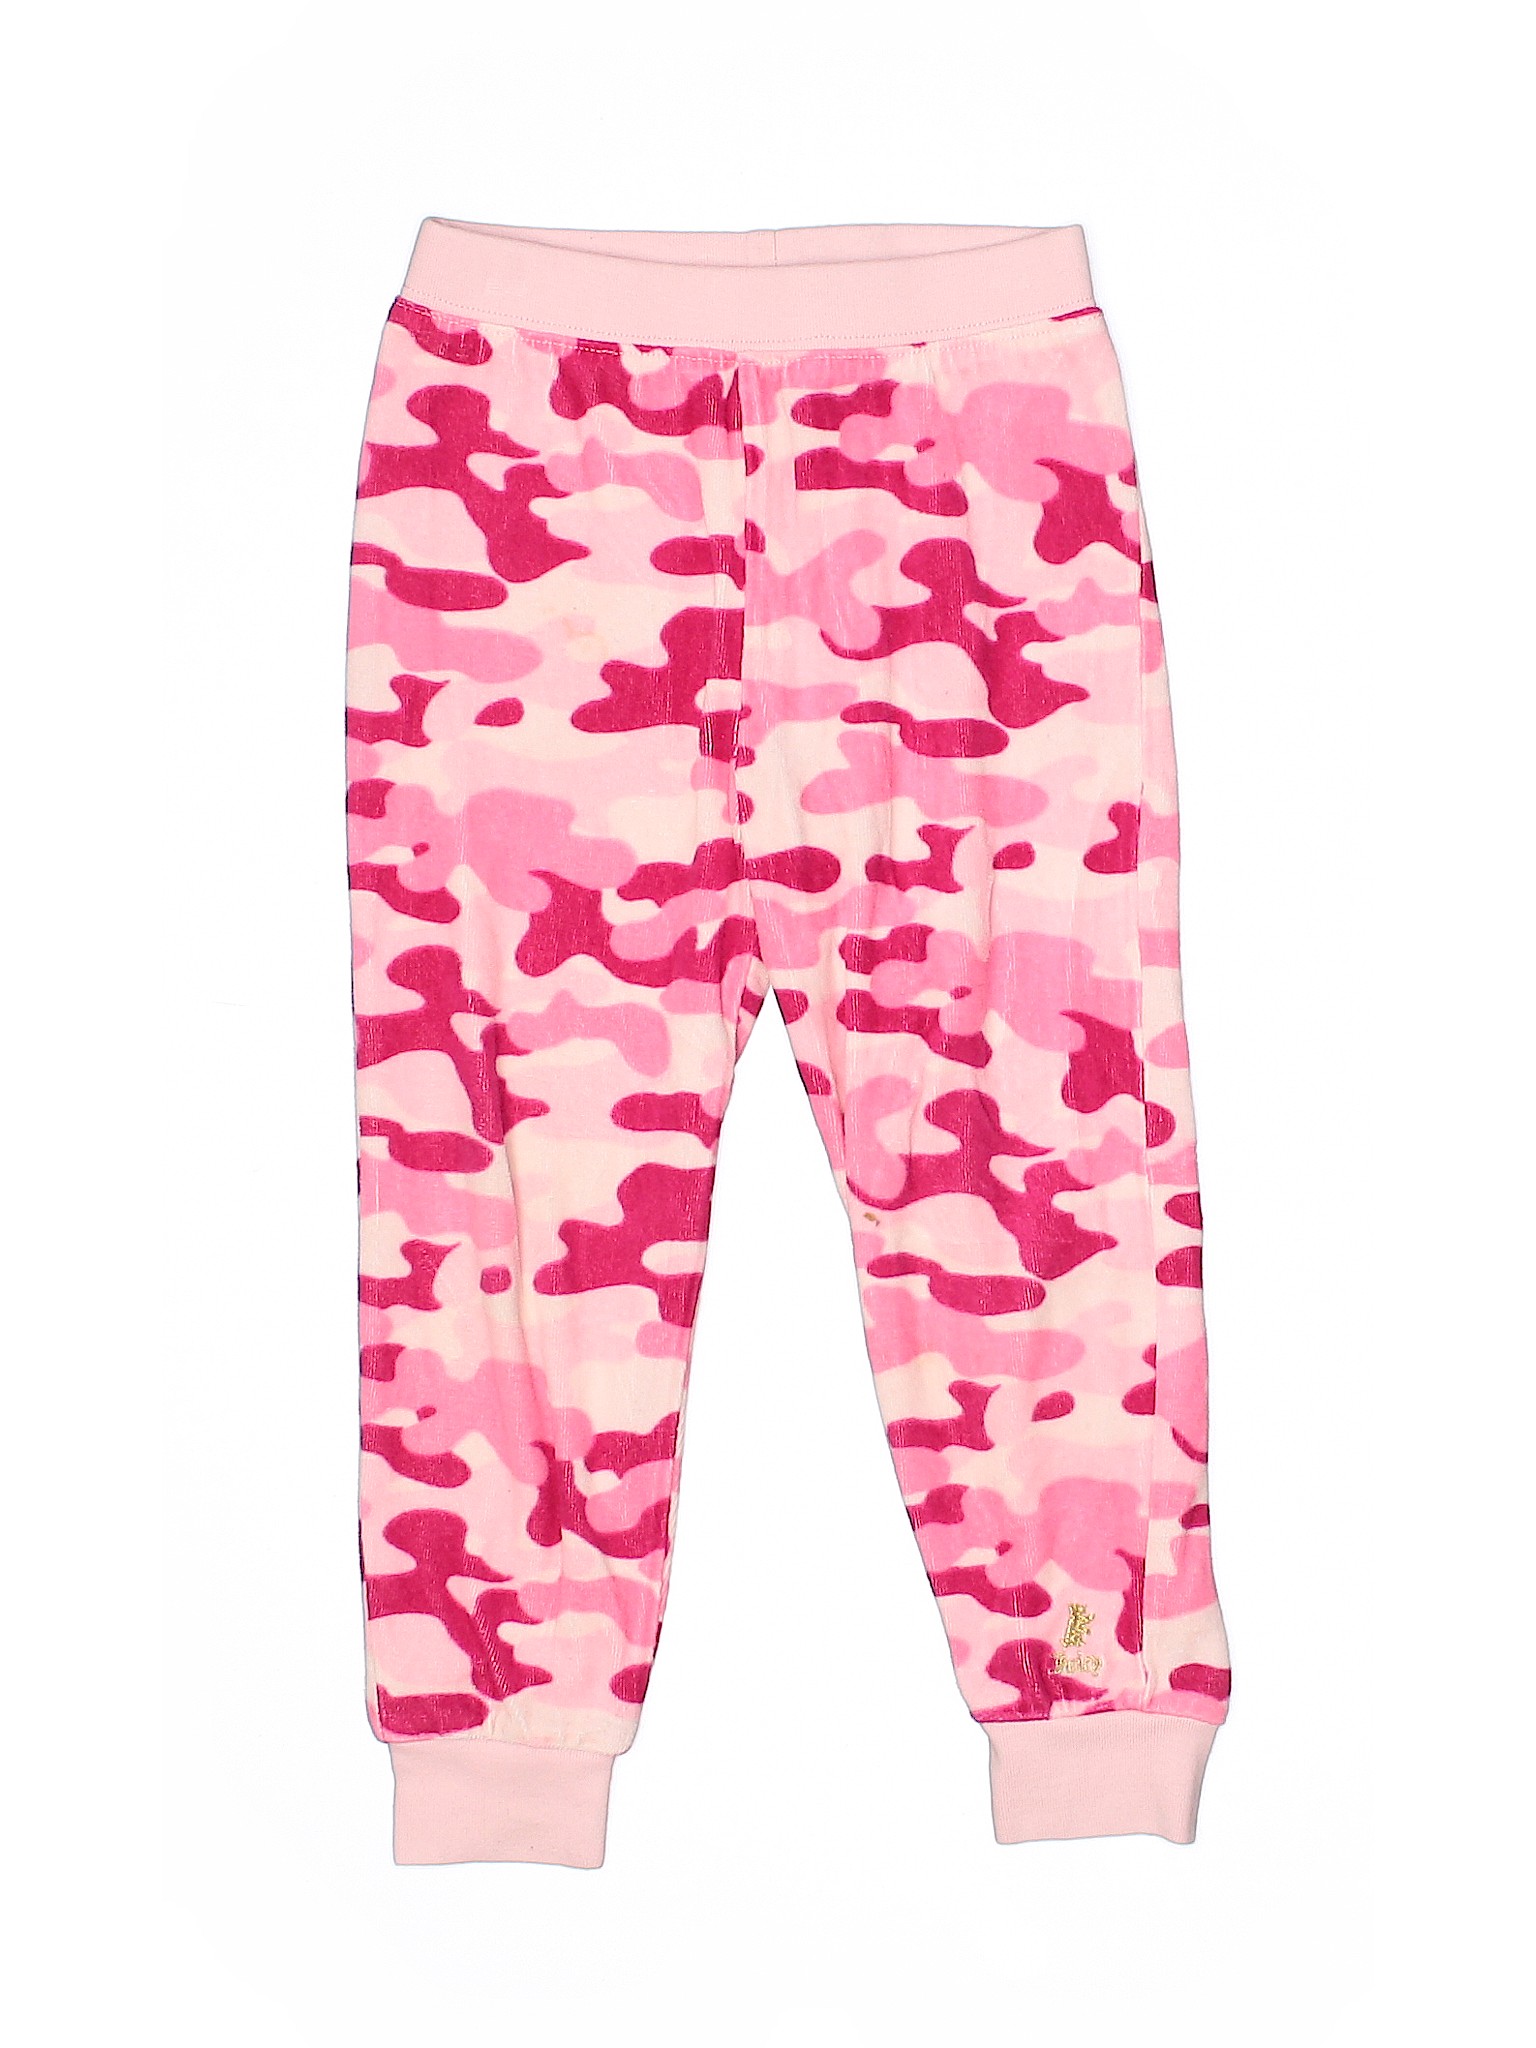 Juicy Couture Girls Pink Velour Pants 4T | eBay